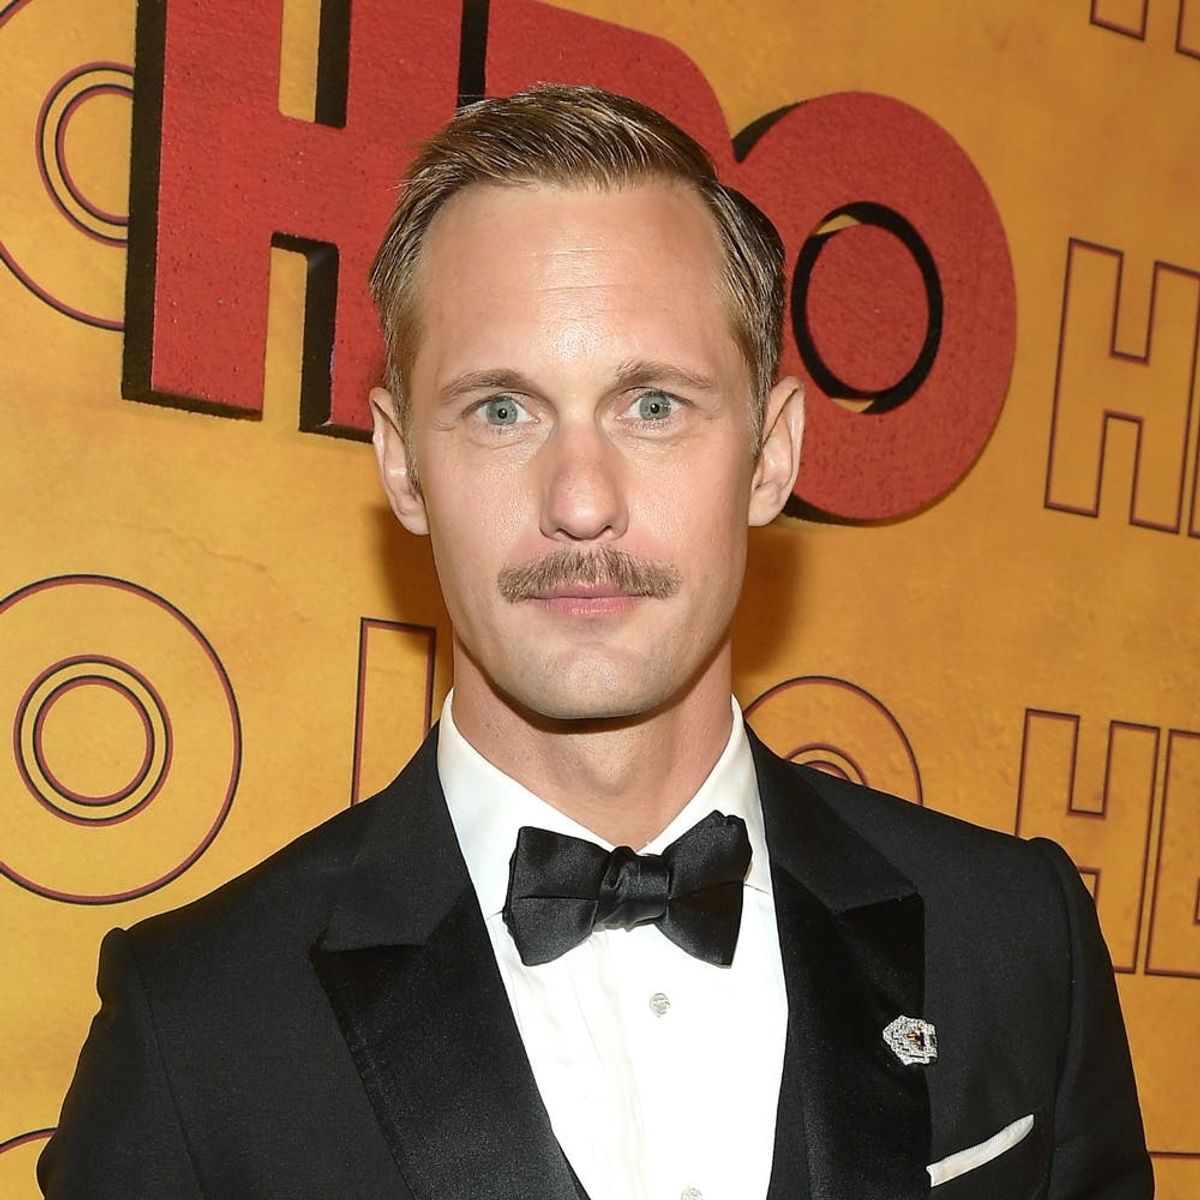 Twitter Compares Alexander Skarsgård’s New Haircut to “Seinfeld’s’ George Costanza”